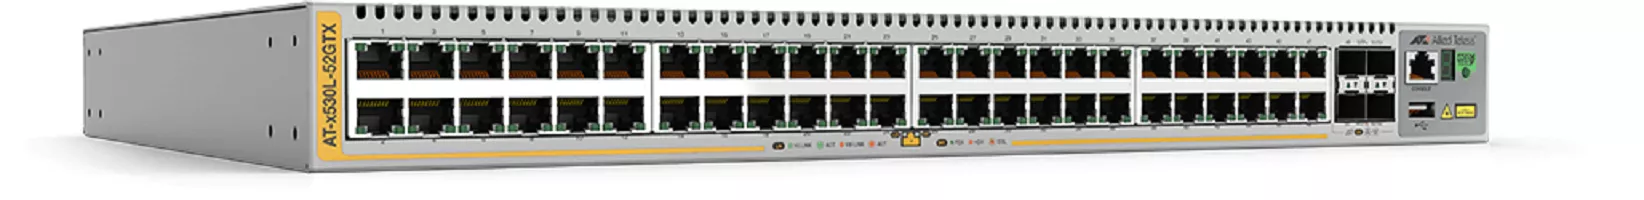 Vente Switchs et Hubs ALLIED 48-port 10/100/1000T stackable switch 4 SFP+ ports 2